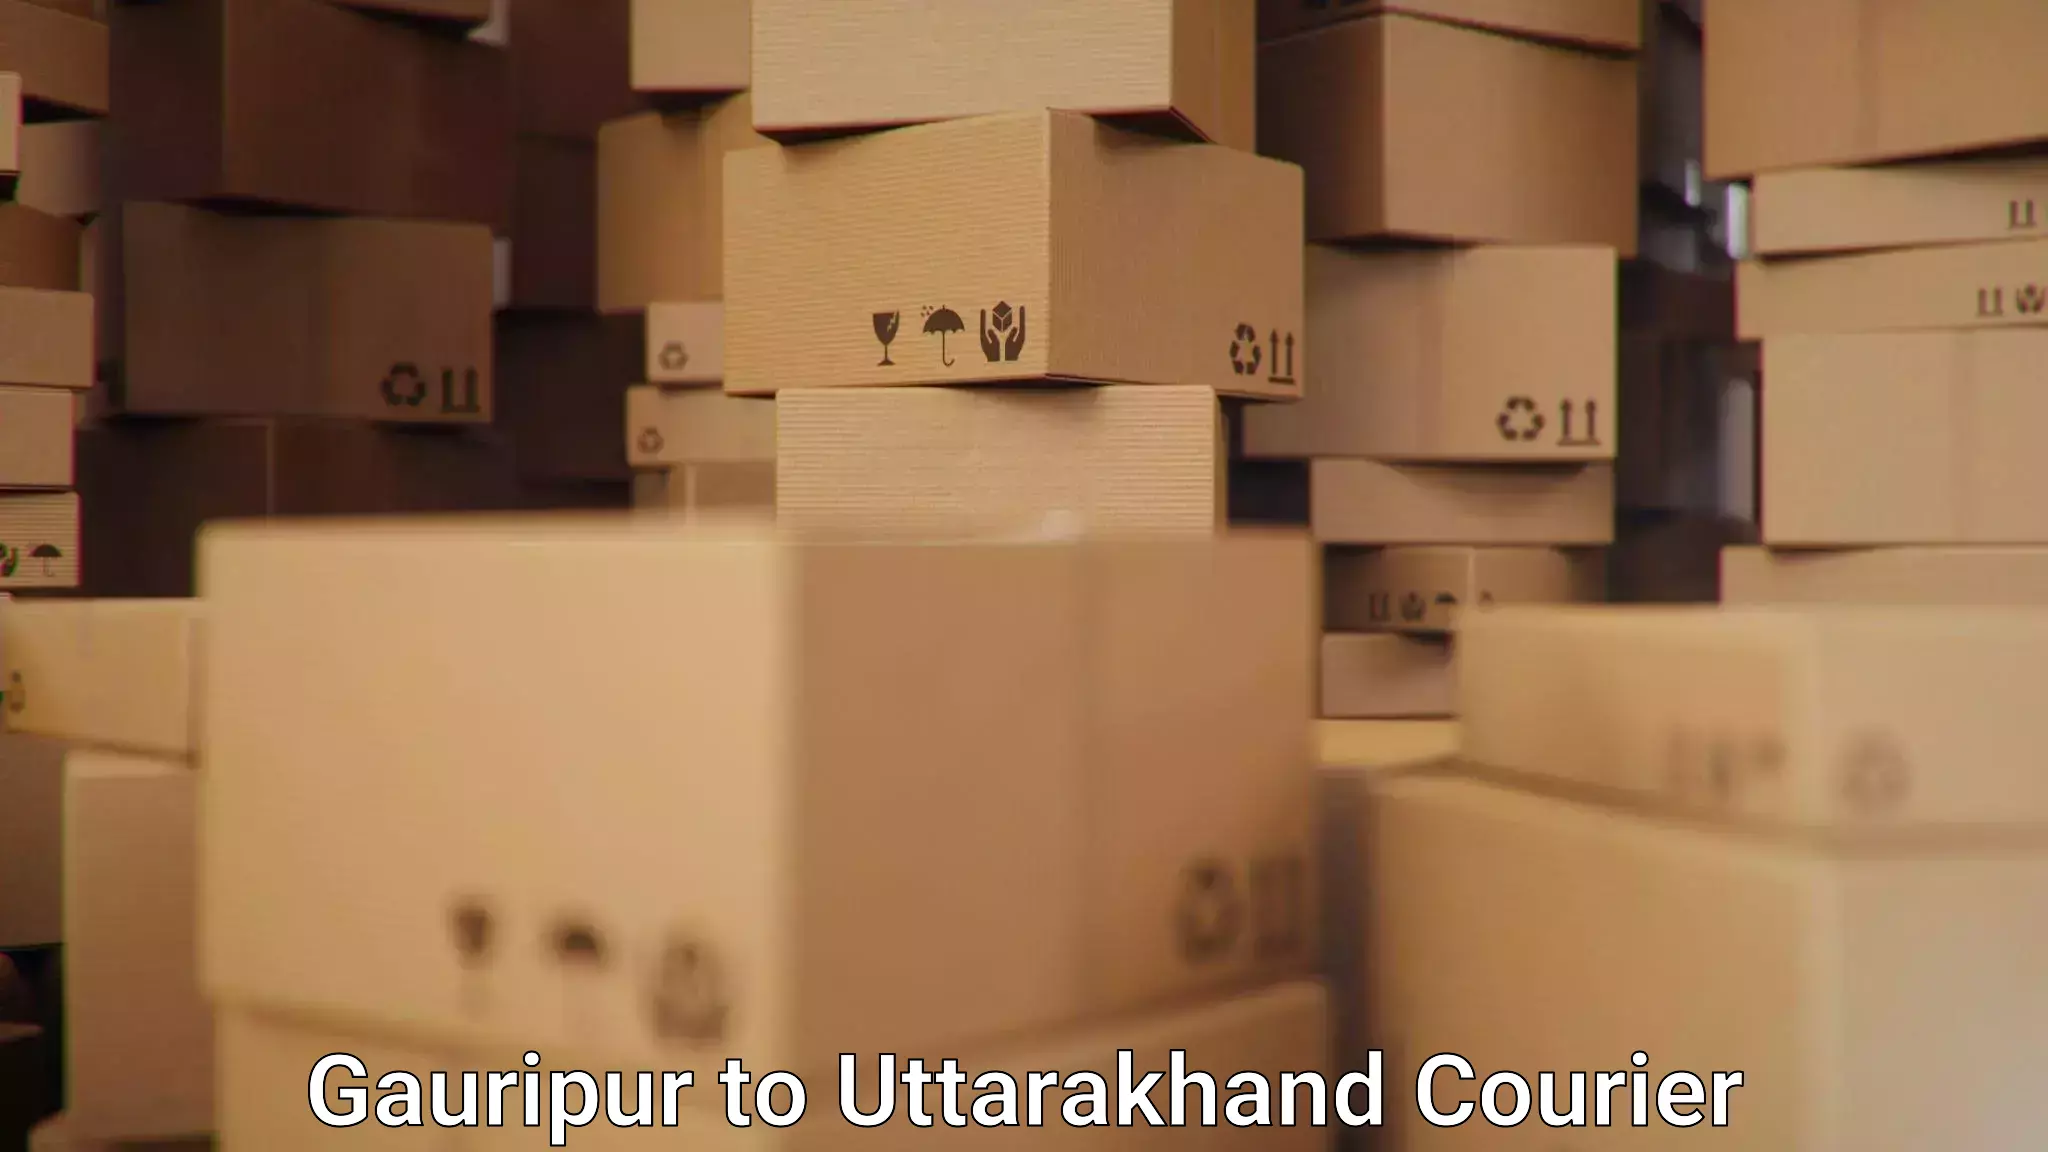 Smart shipping technology Gauripur to Pithoragarh